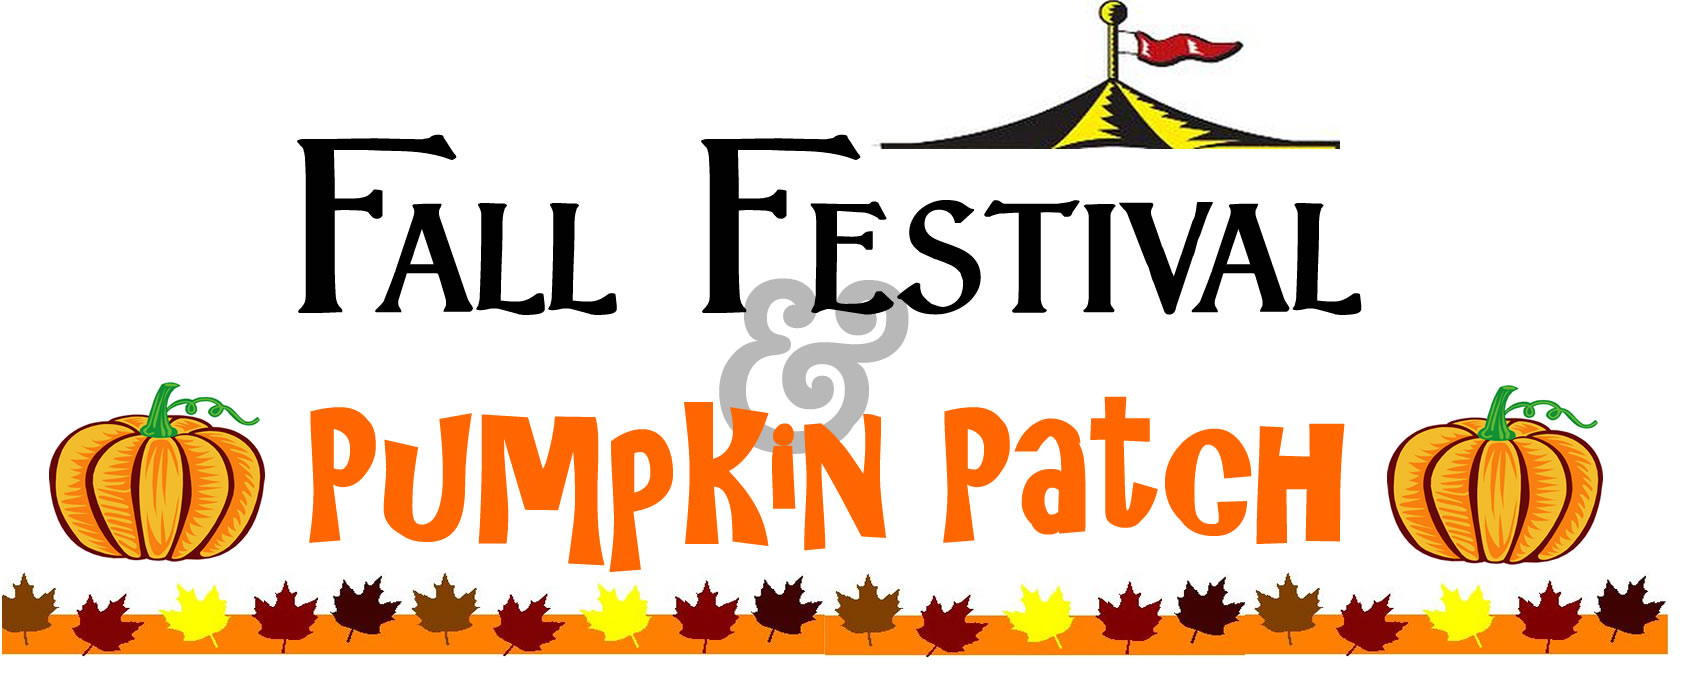 Fall Festival Clipart   Clipart Panda   Free Clipart Images